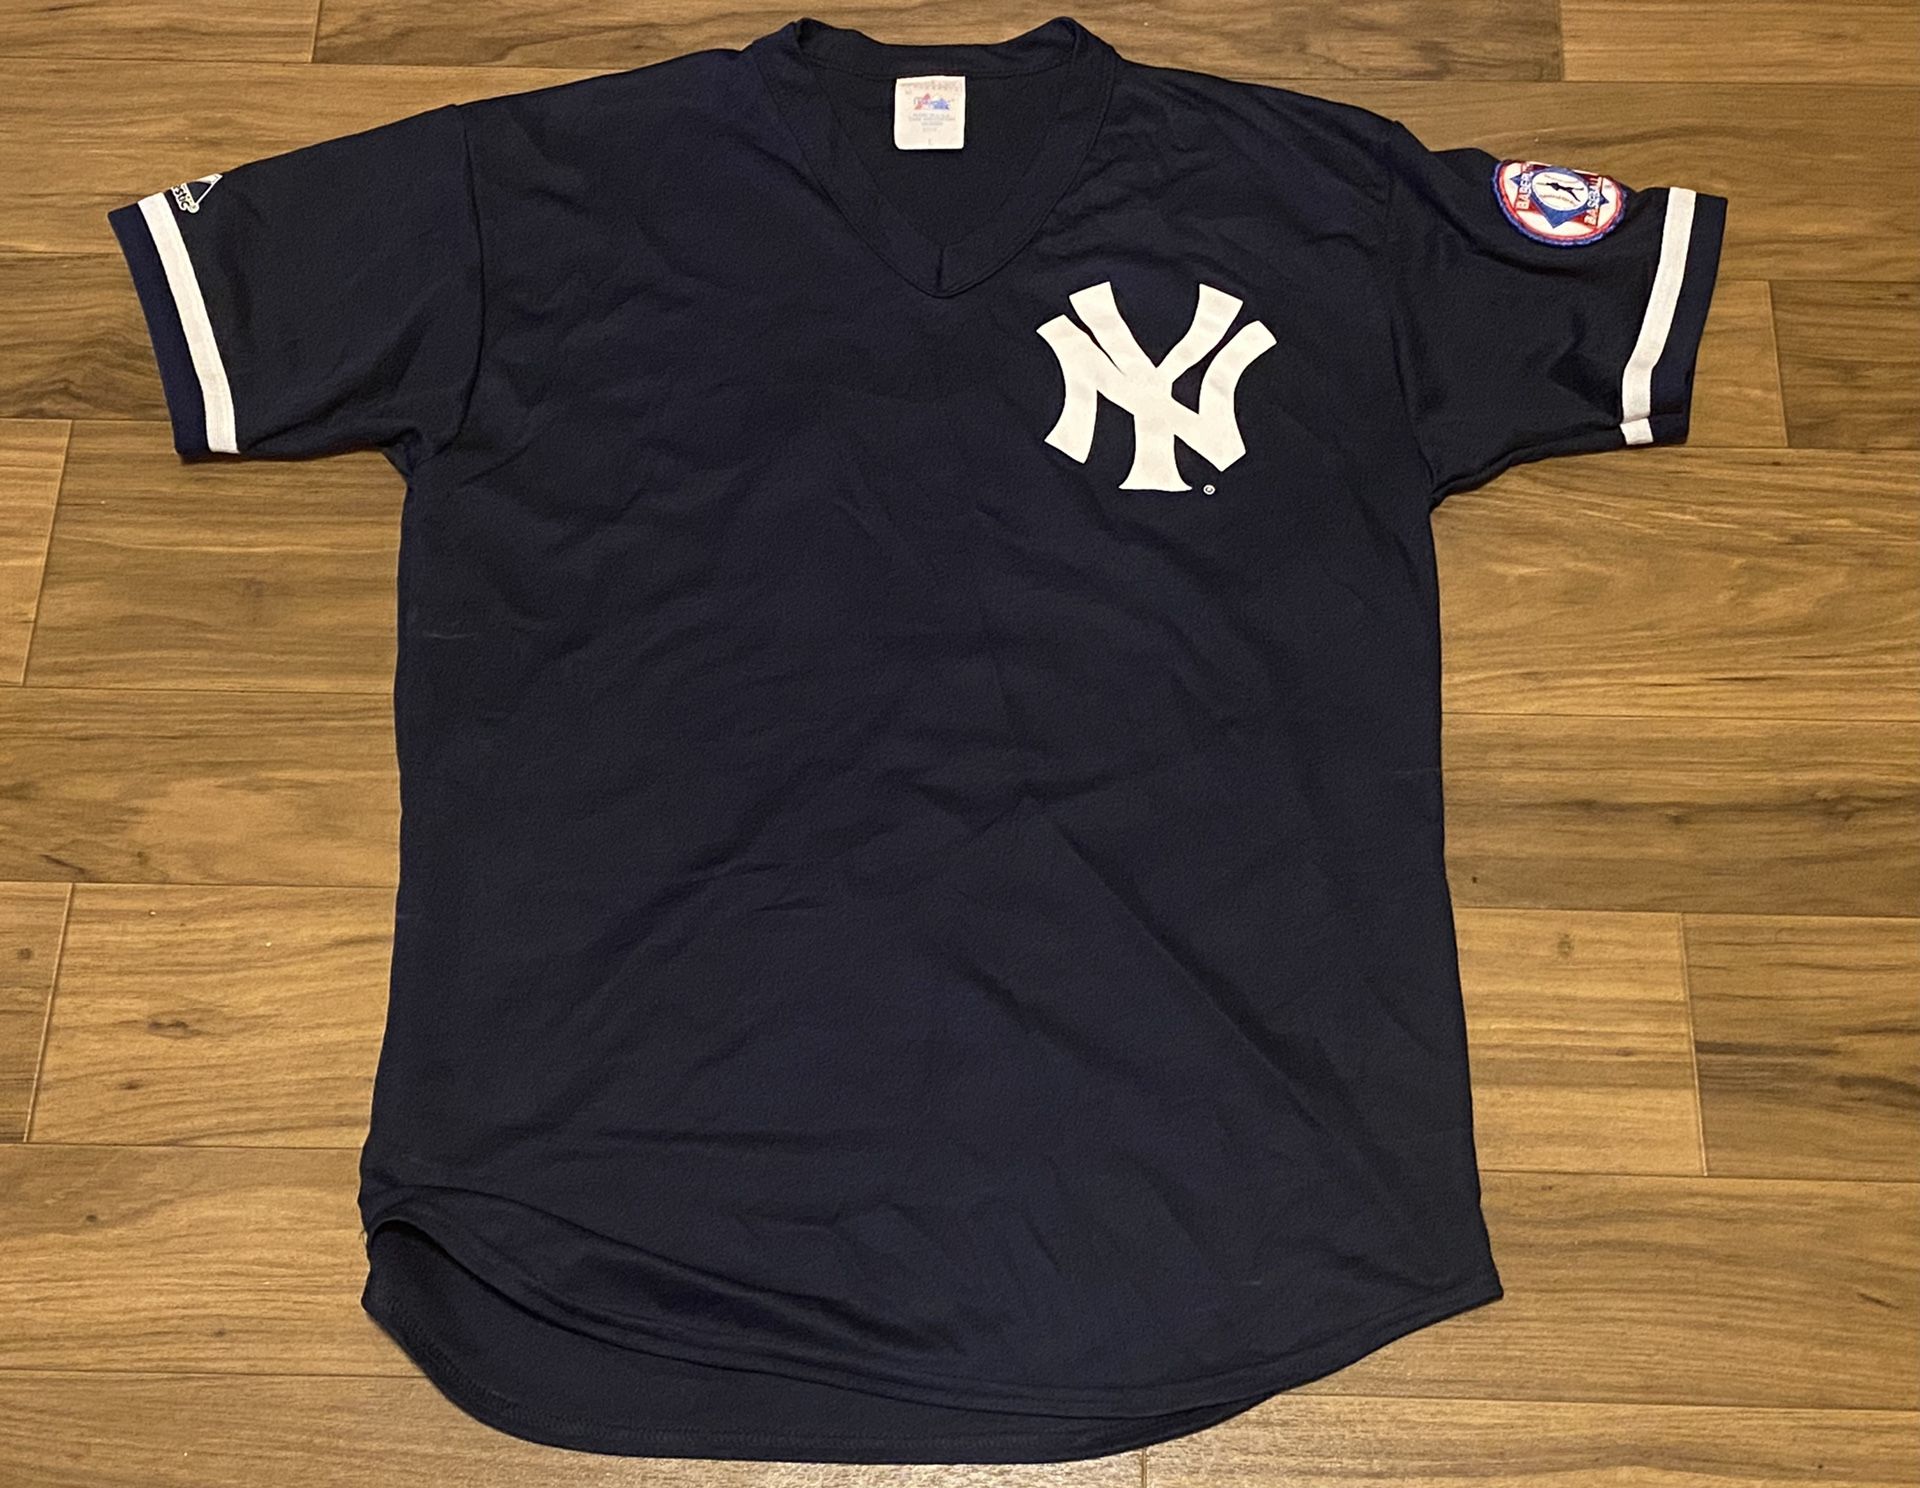 Baseball Jersey for Sale in Puyallup, WA - OfferUp